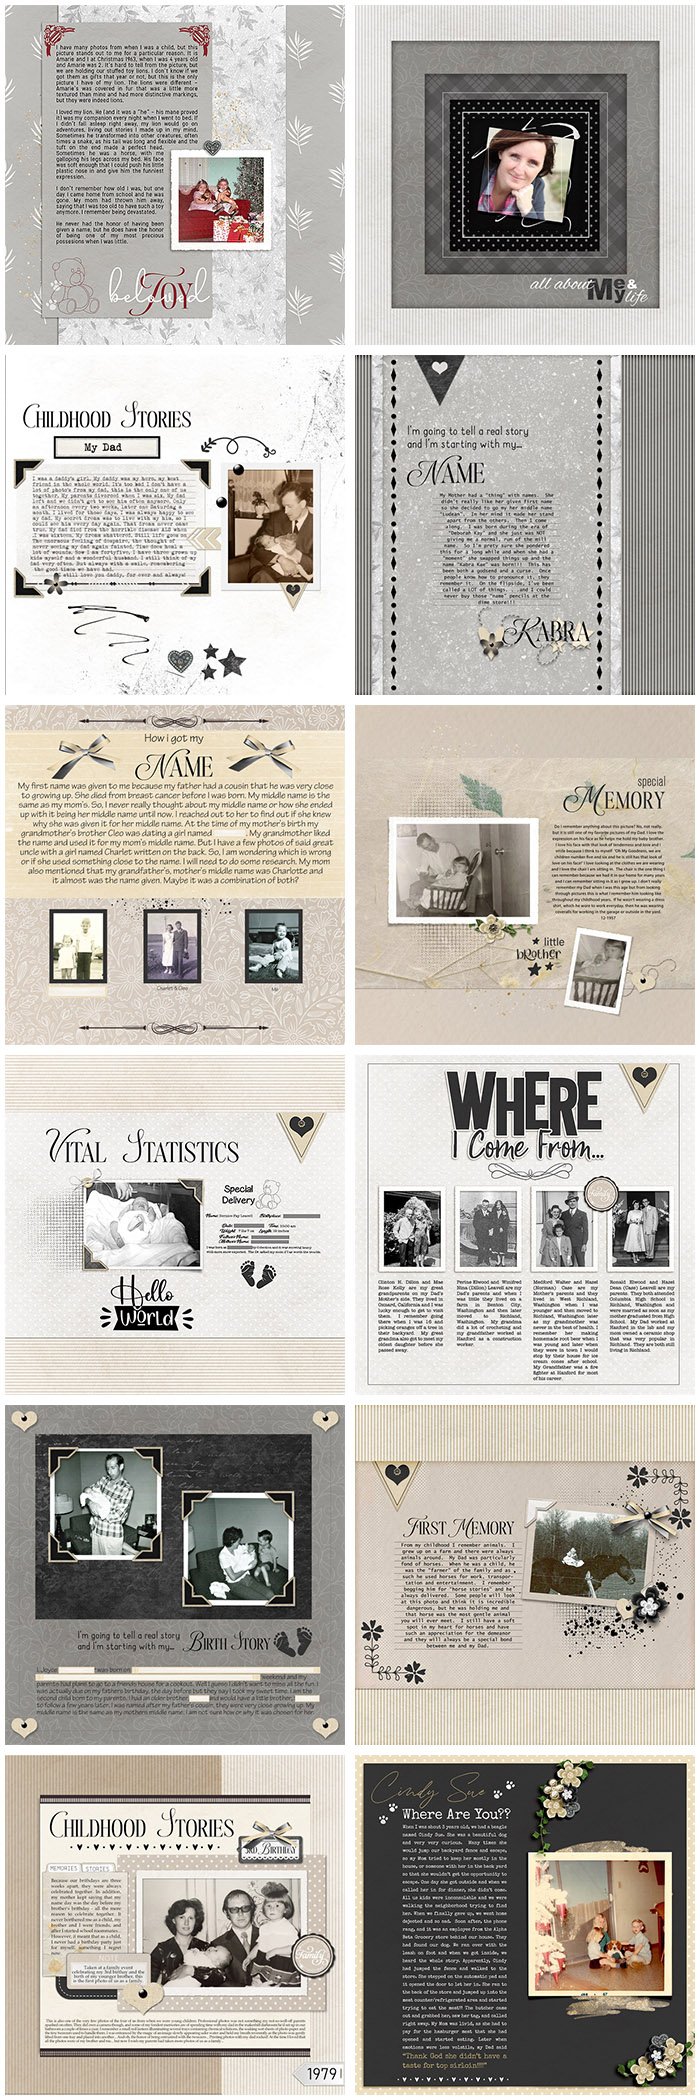 Scrapbook-Inspiration-for-TElling-Your-Story-page 01 by-karen-Schulz-Designs